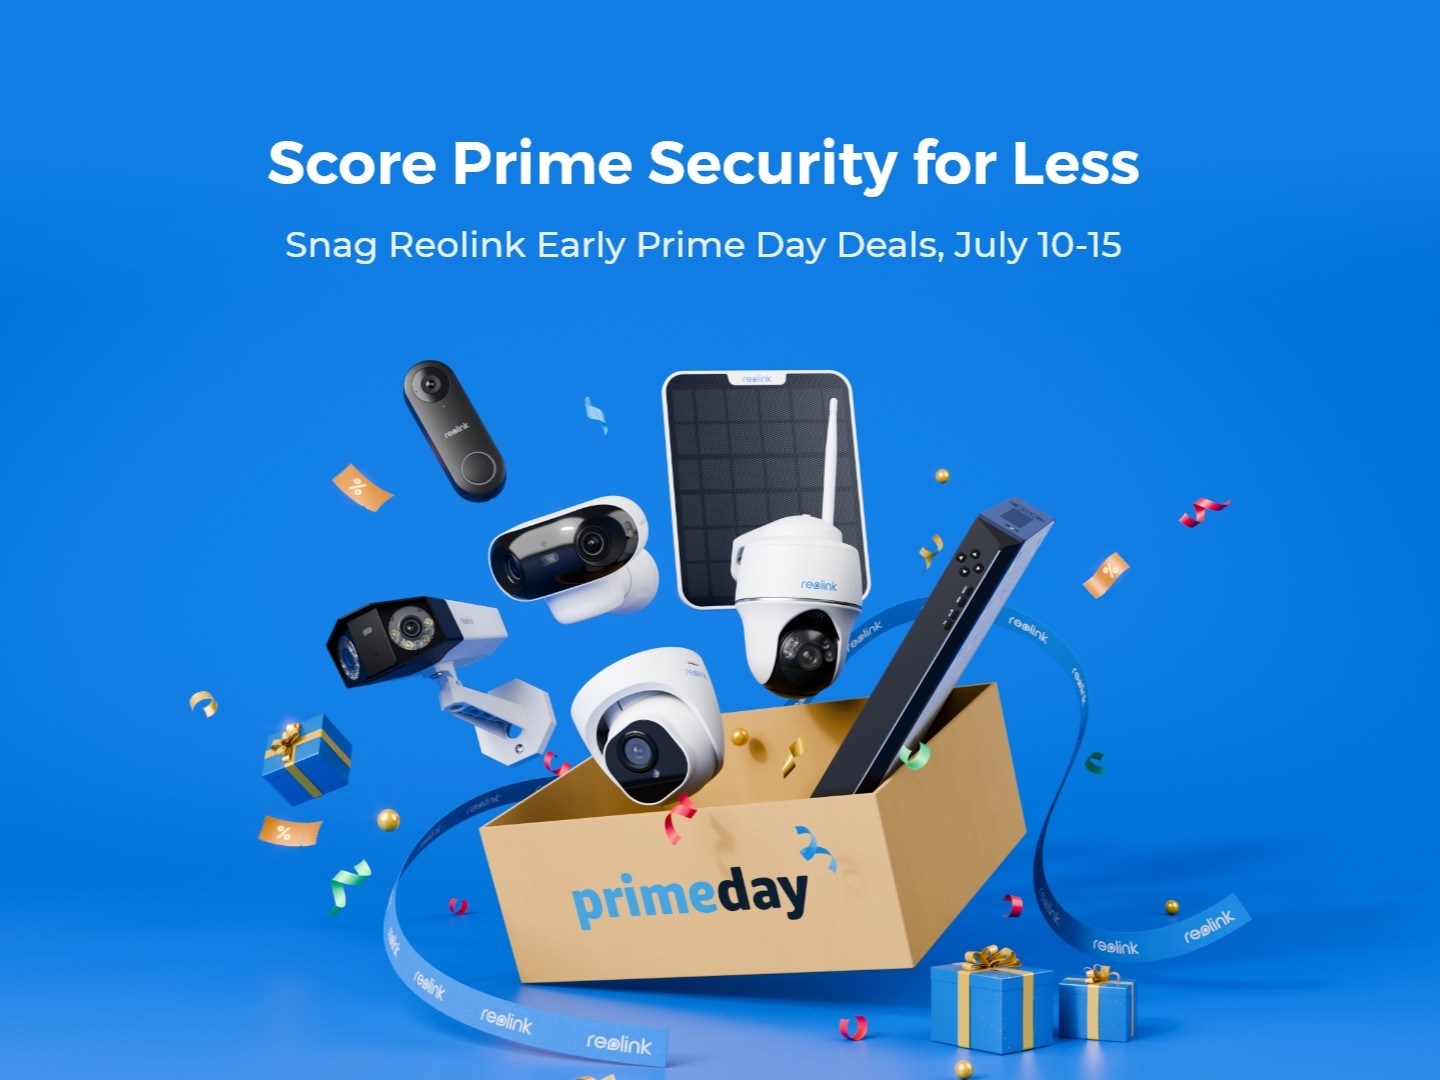 Reolink Score Prime Day home security offers